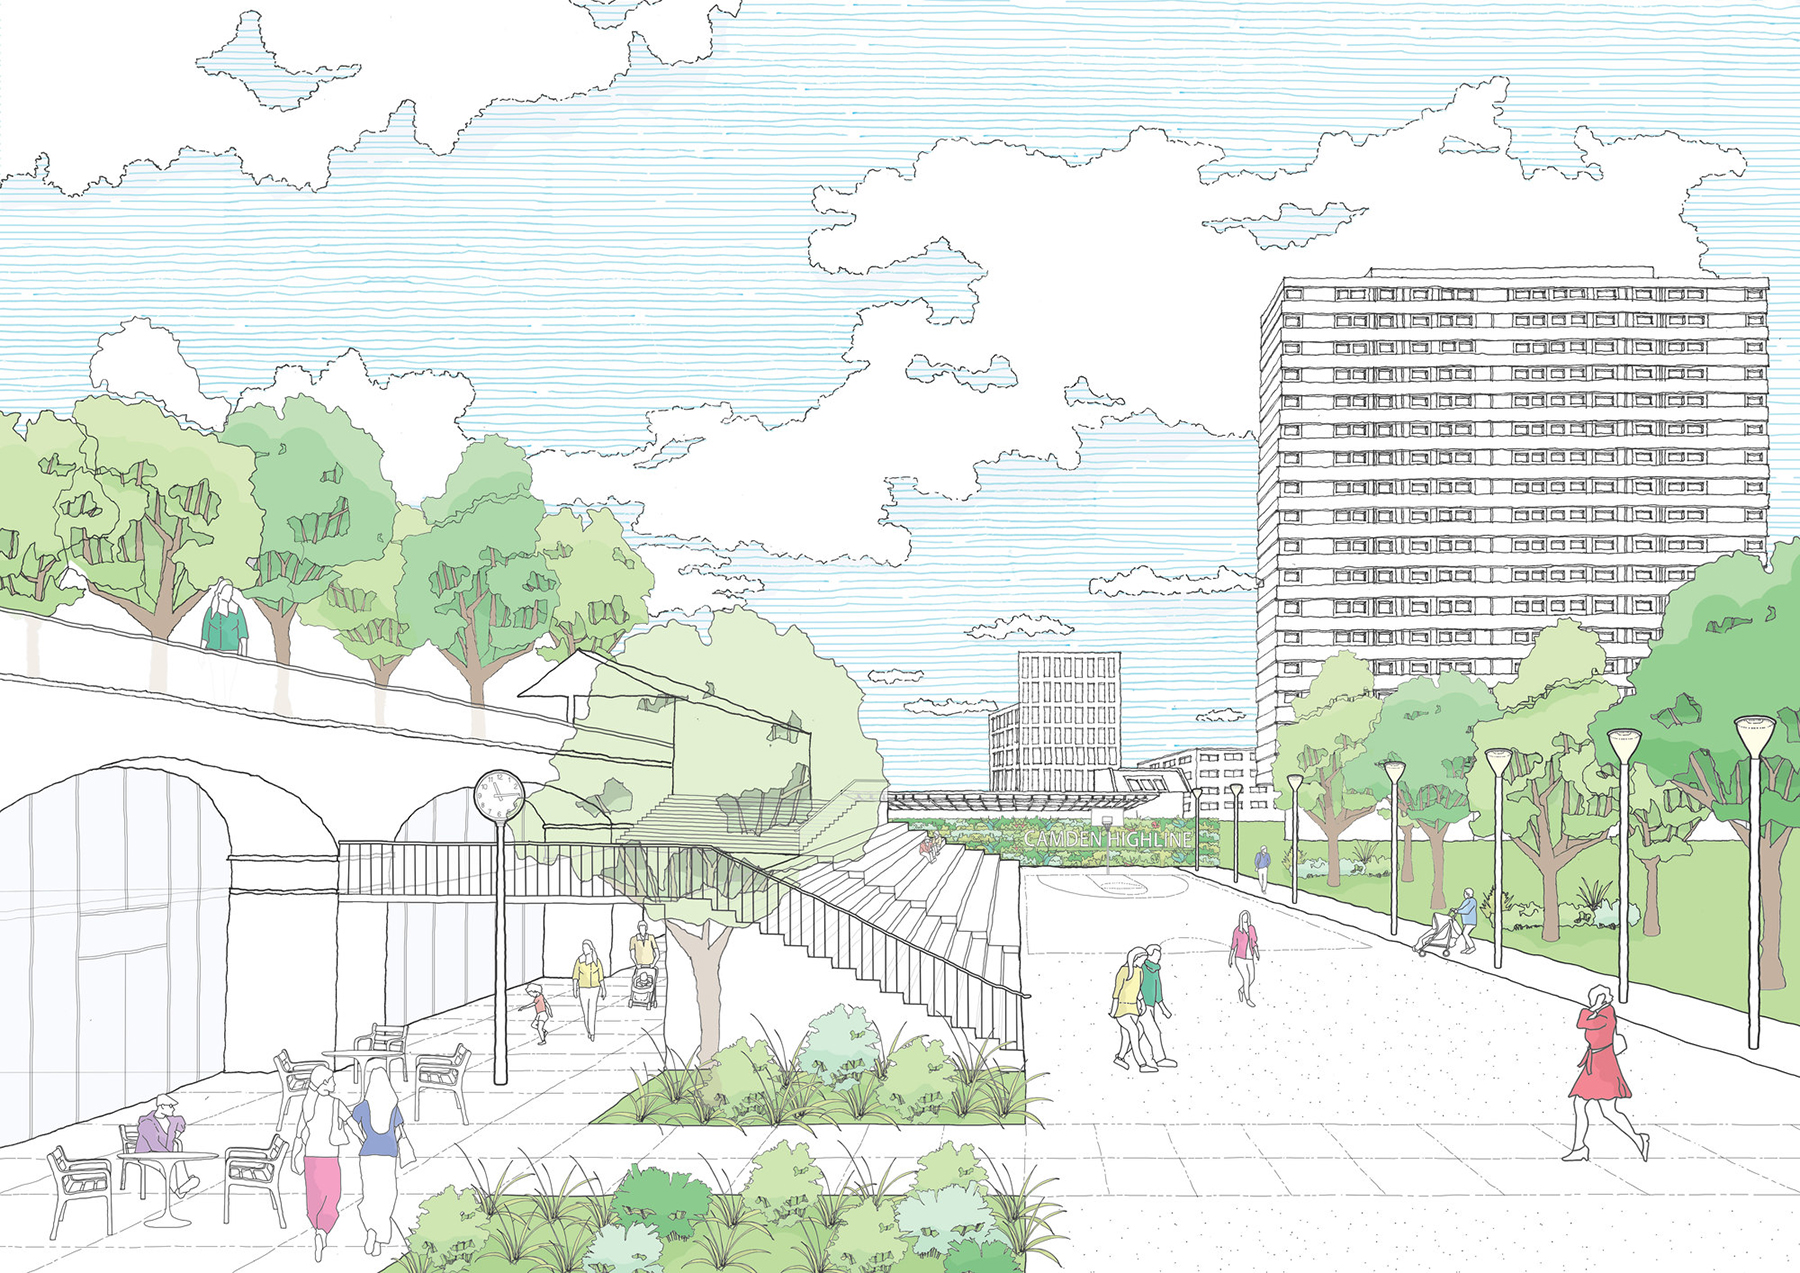 London May Get Own Version of New York's High Line Park1800 x 1273